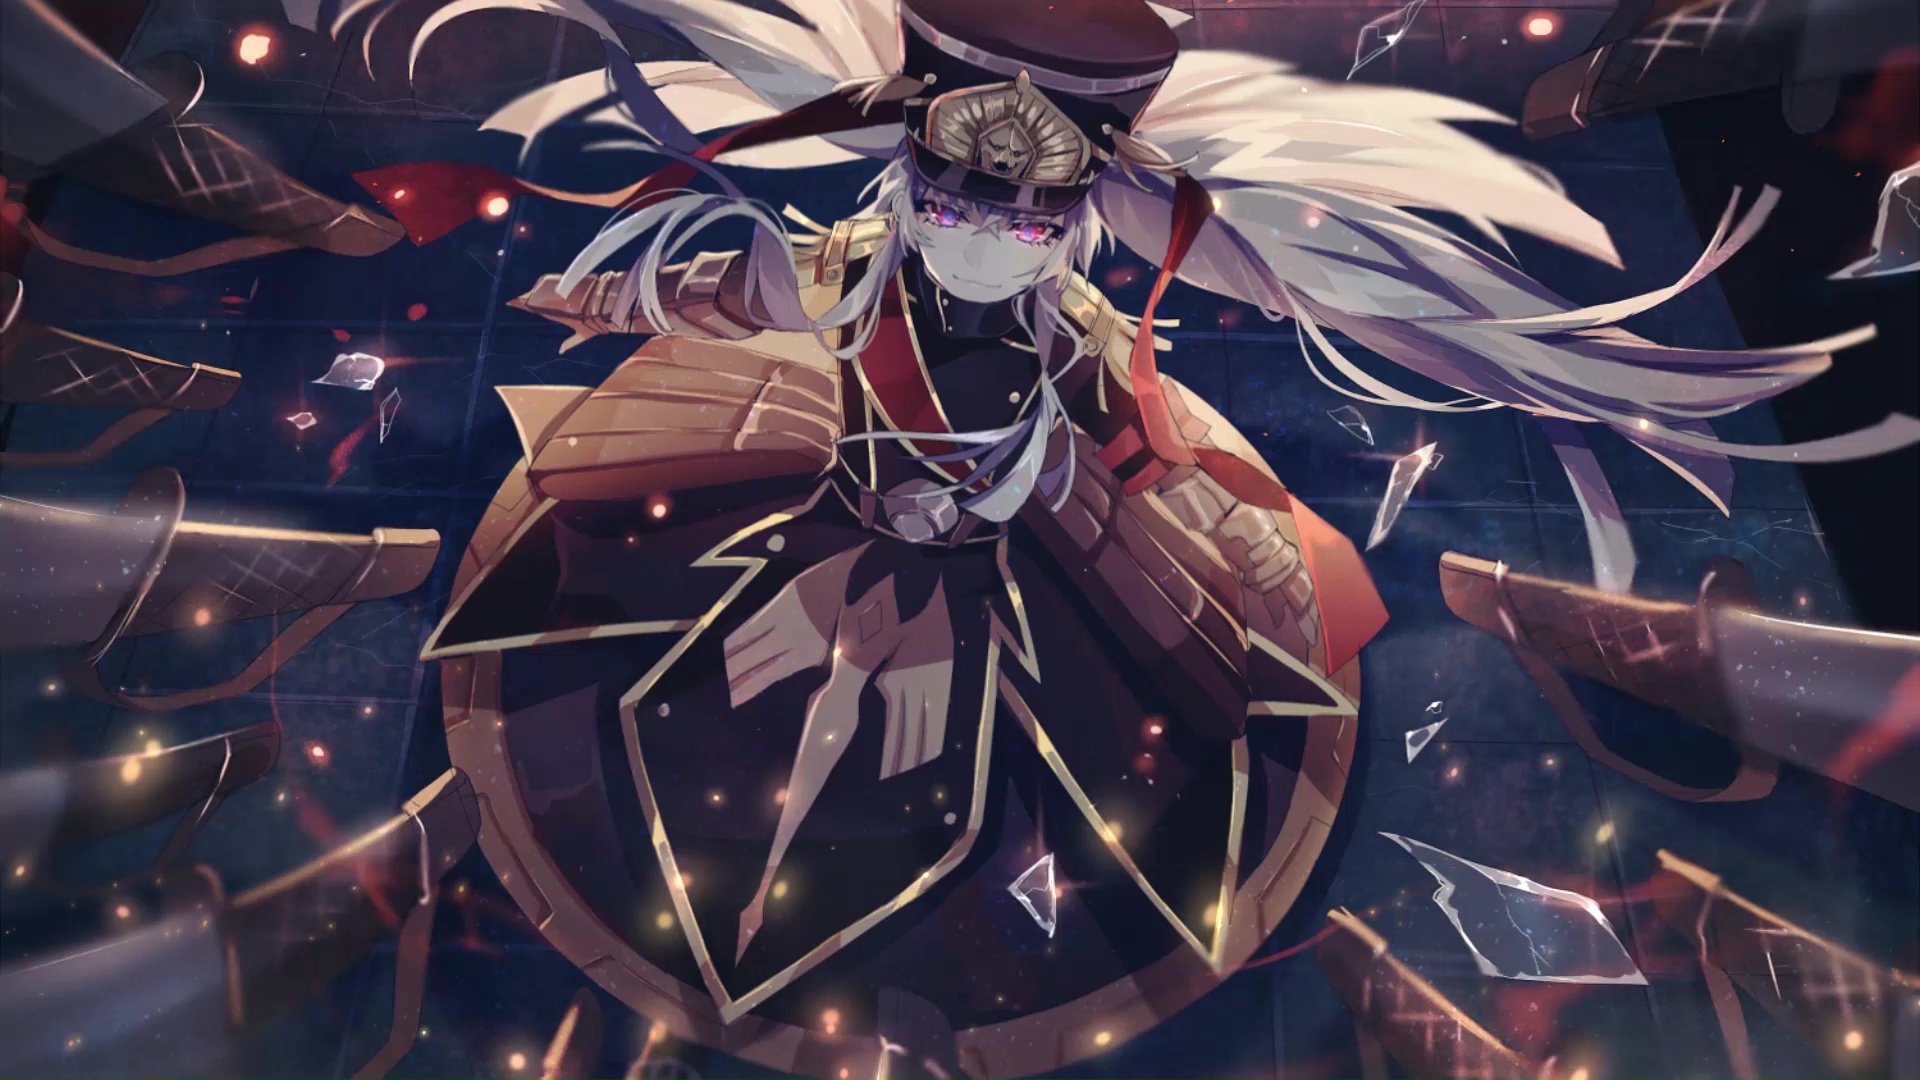 Wallpaper altair, re:creators, anime girl, army, anime desktop wallpaper,  hd image, picture, background, bcc67e | wallpapersmug